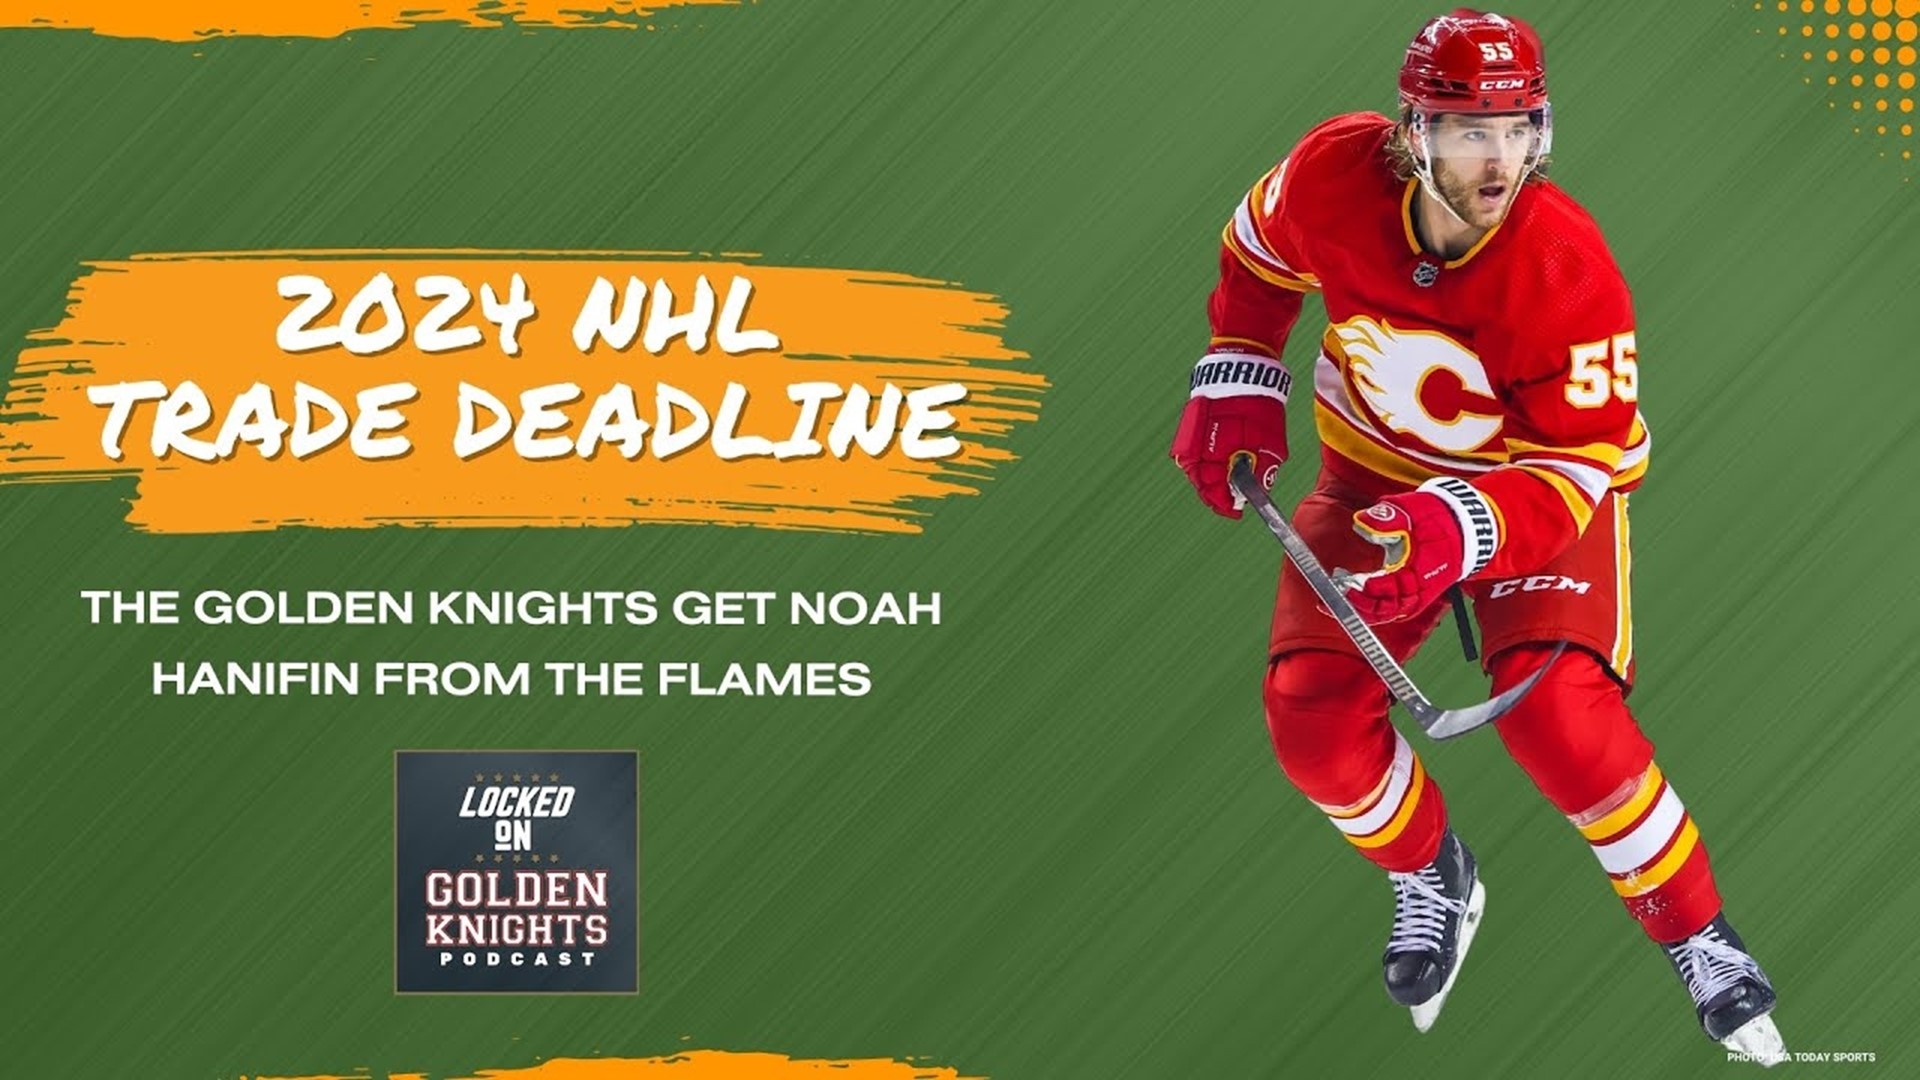 The Vegas Golden Knights have done it again, swooping in before the NHL Trade Deadline to land Noah Hanifin, the best defenseman on the market.